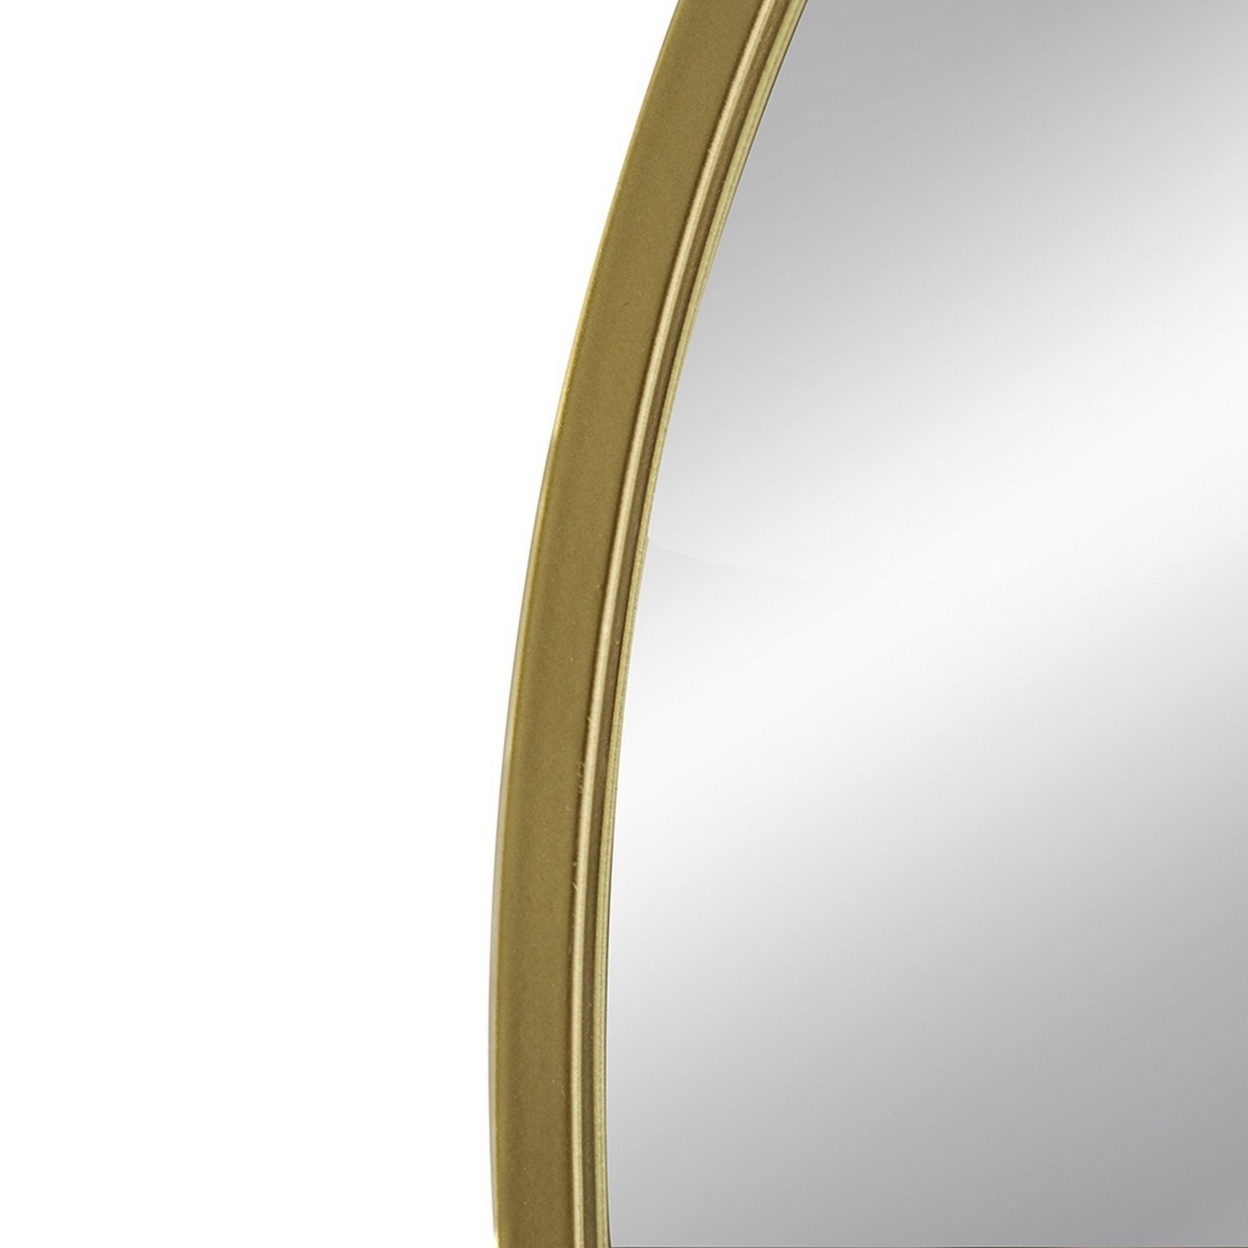 Cod 36 Inch Wall Mounted Mirror, Wide Arched Design Gold Metal Frame- Saltoro Sherpi